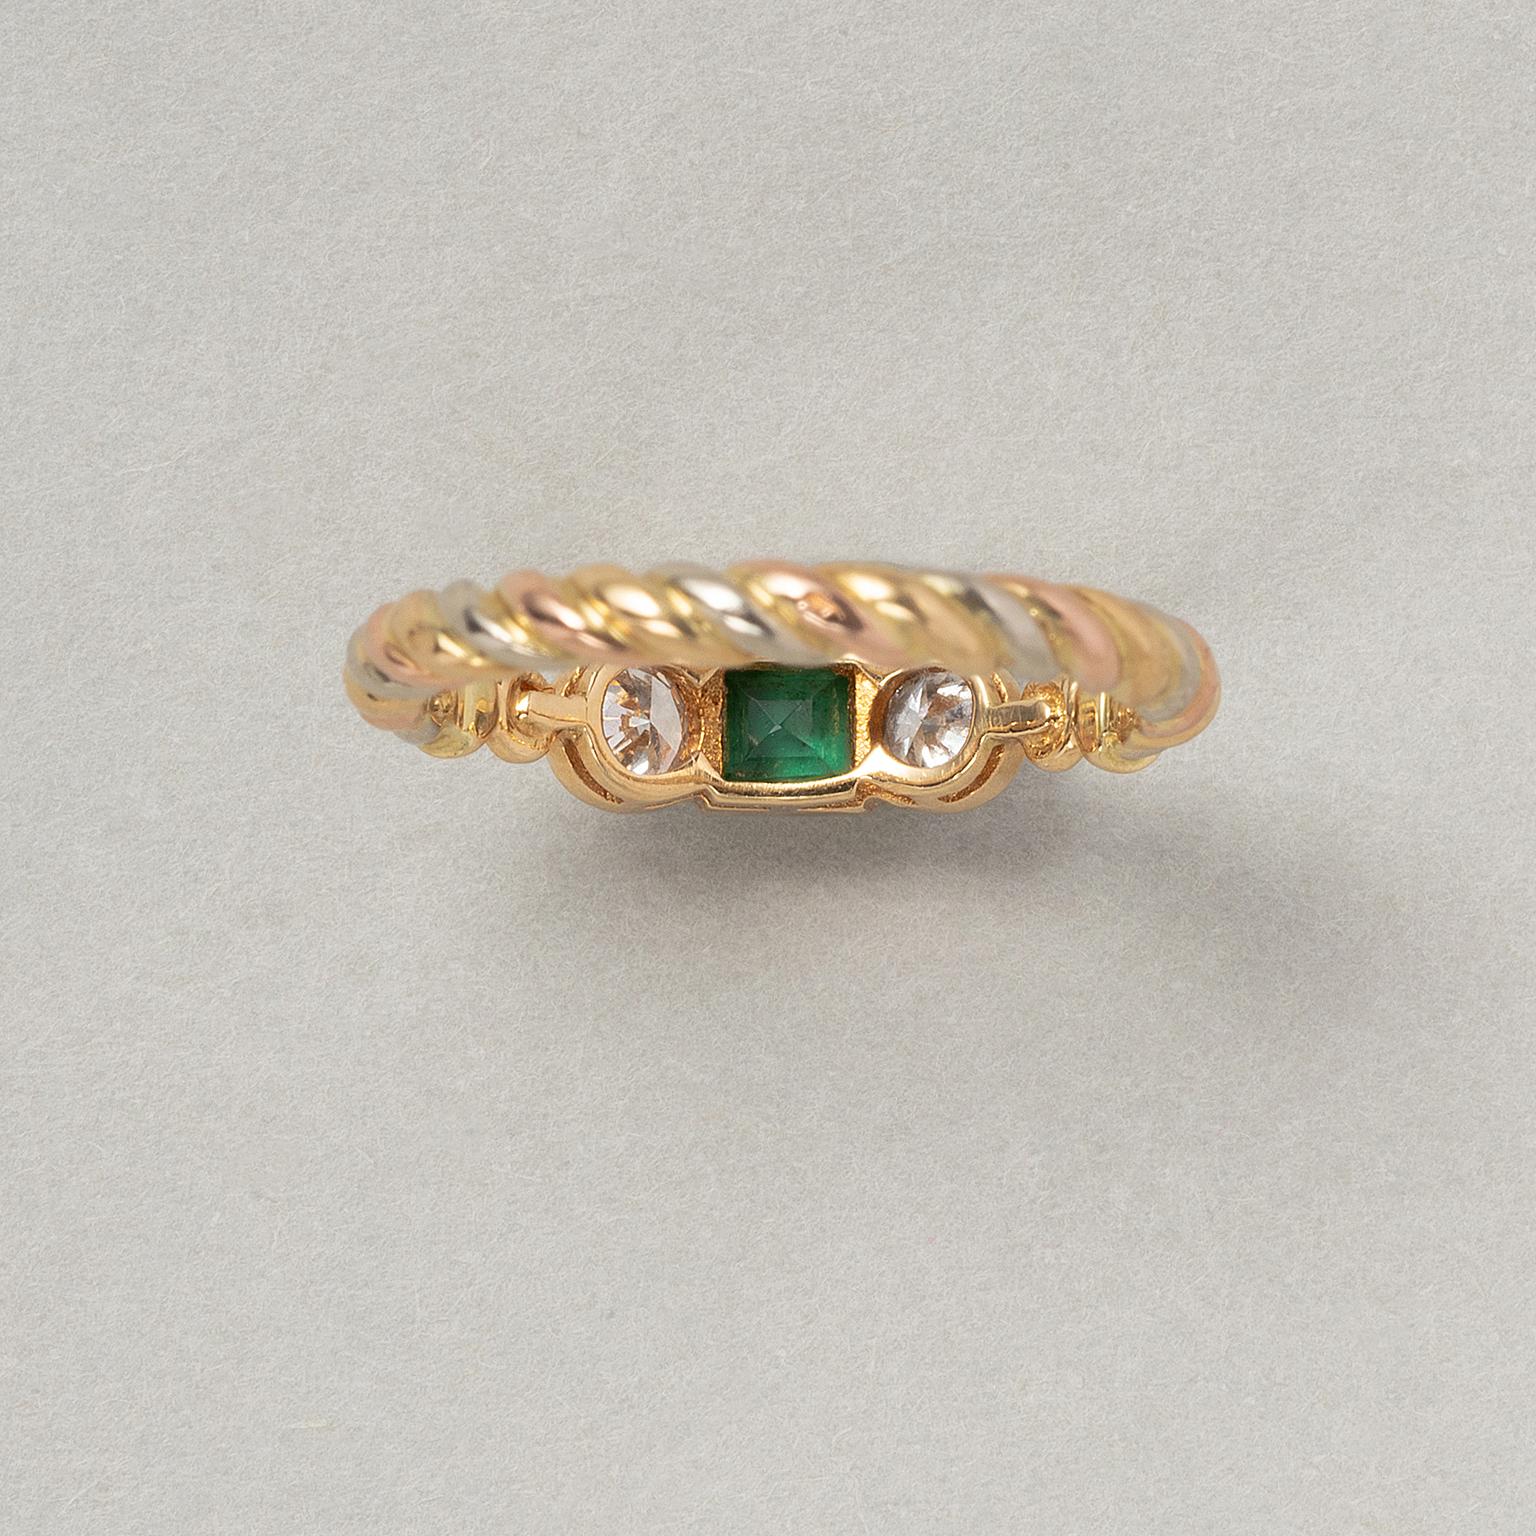 Women's or Men's An 18 Carat Gold Cartier Three-Stone Ring with Diamond and Emerald